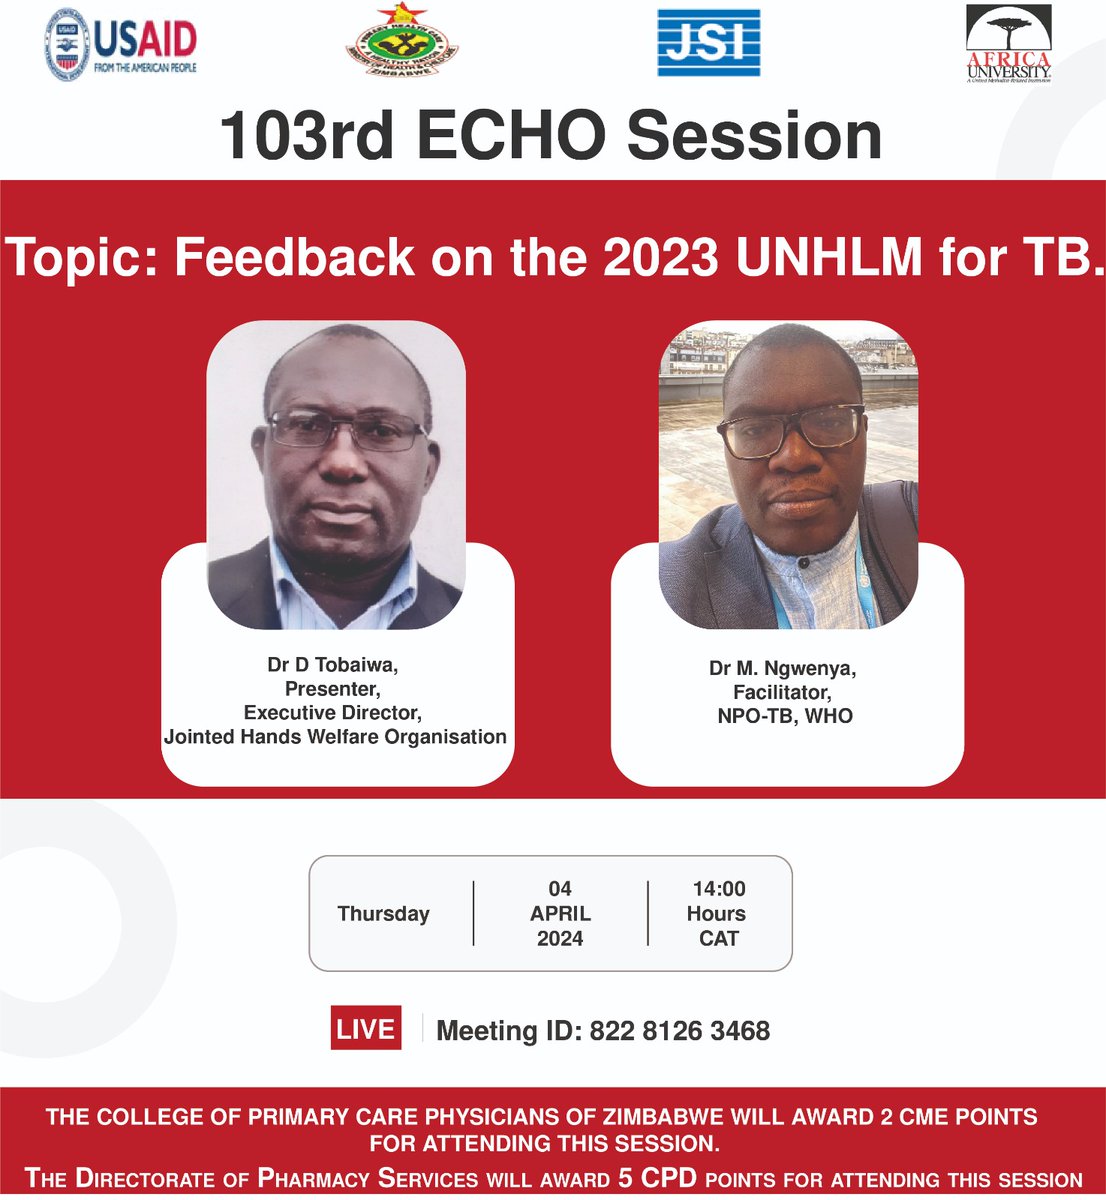 Join our Executive Director today, as he will be giving feedback on the 2023 UNHLM for TB during the 103rd ECHO Session. #EndTB #YesWeCanEndTB @UsaidZimbabwe @MoHCCZim @StopTBZimbabwe @UnionZimTrust @bainesohs @zimbabwe_health